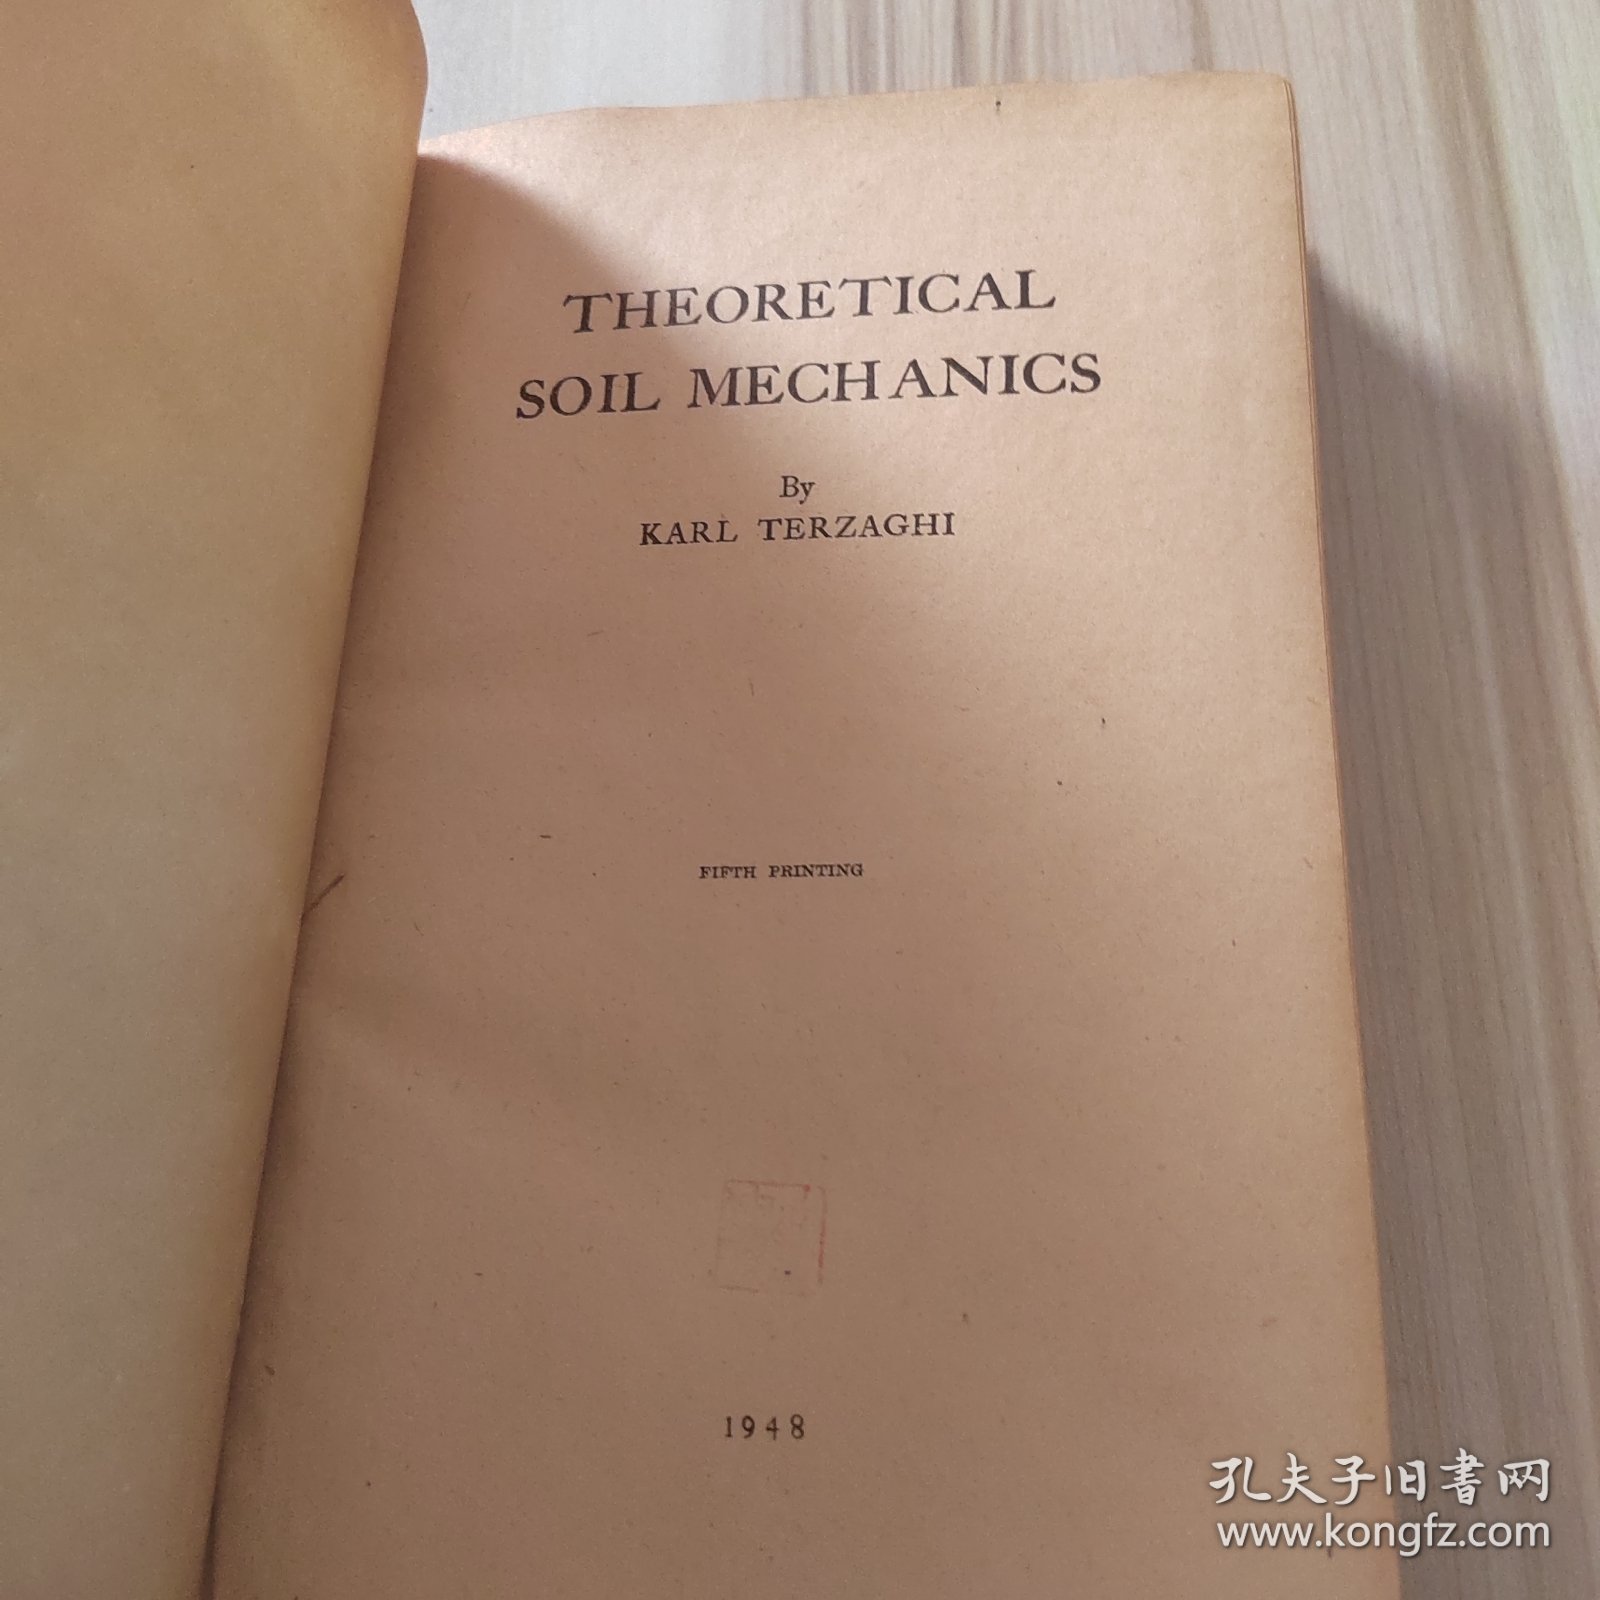 THEORETICAL SOLL MECHANICS by karl terzaghi